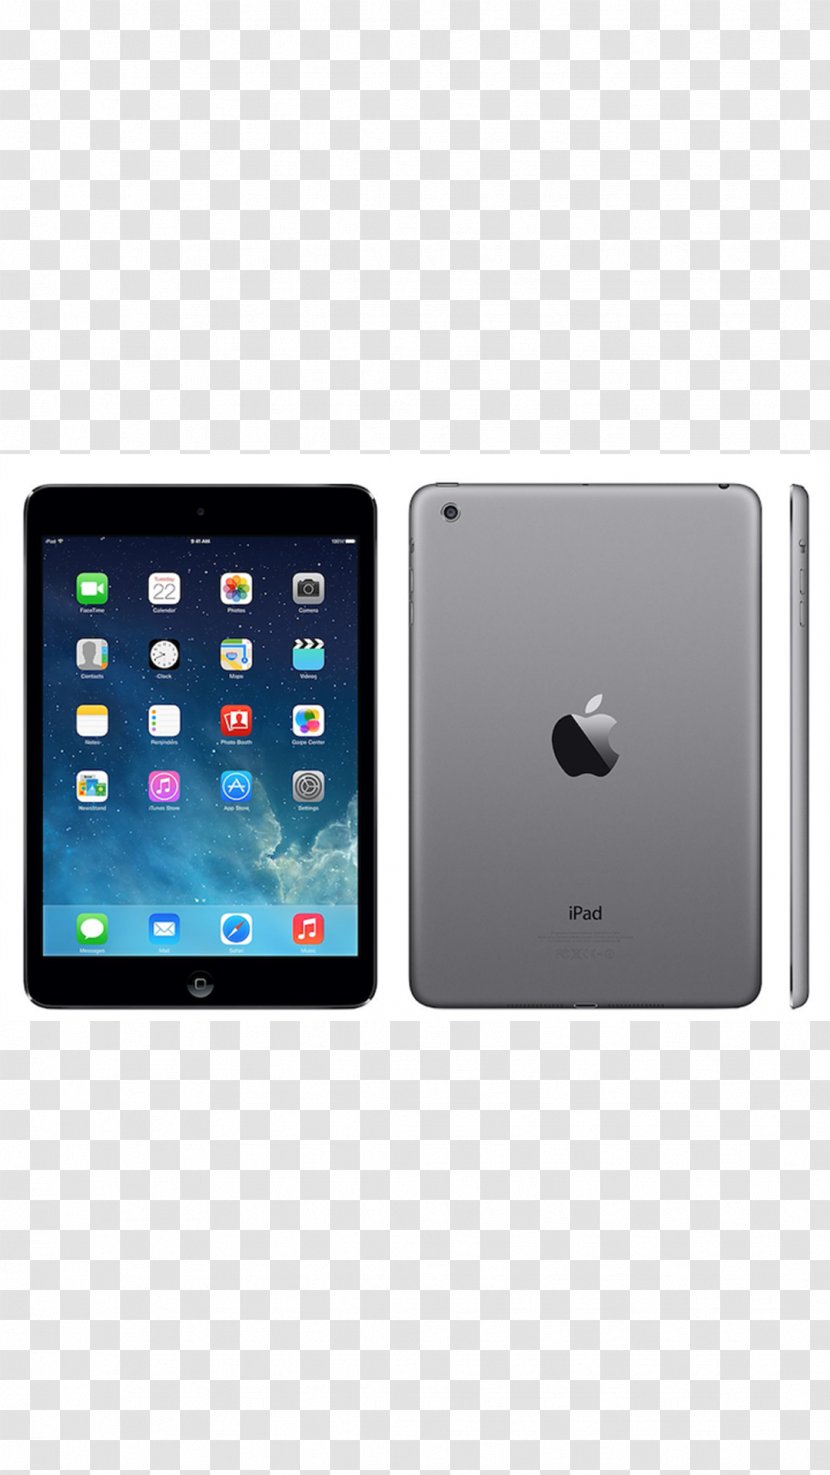 IPad Mini 2 Air 3 - Mobile Phone - Apple Products In Kind 14 0 1 Transparent PNG